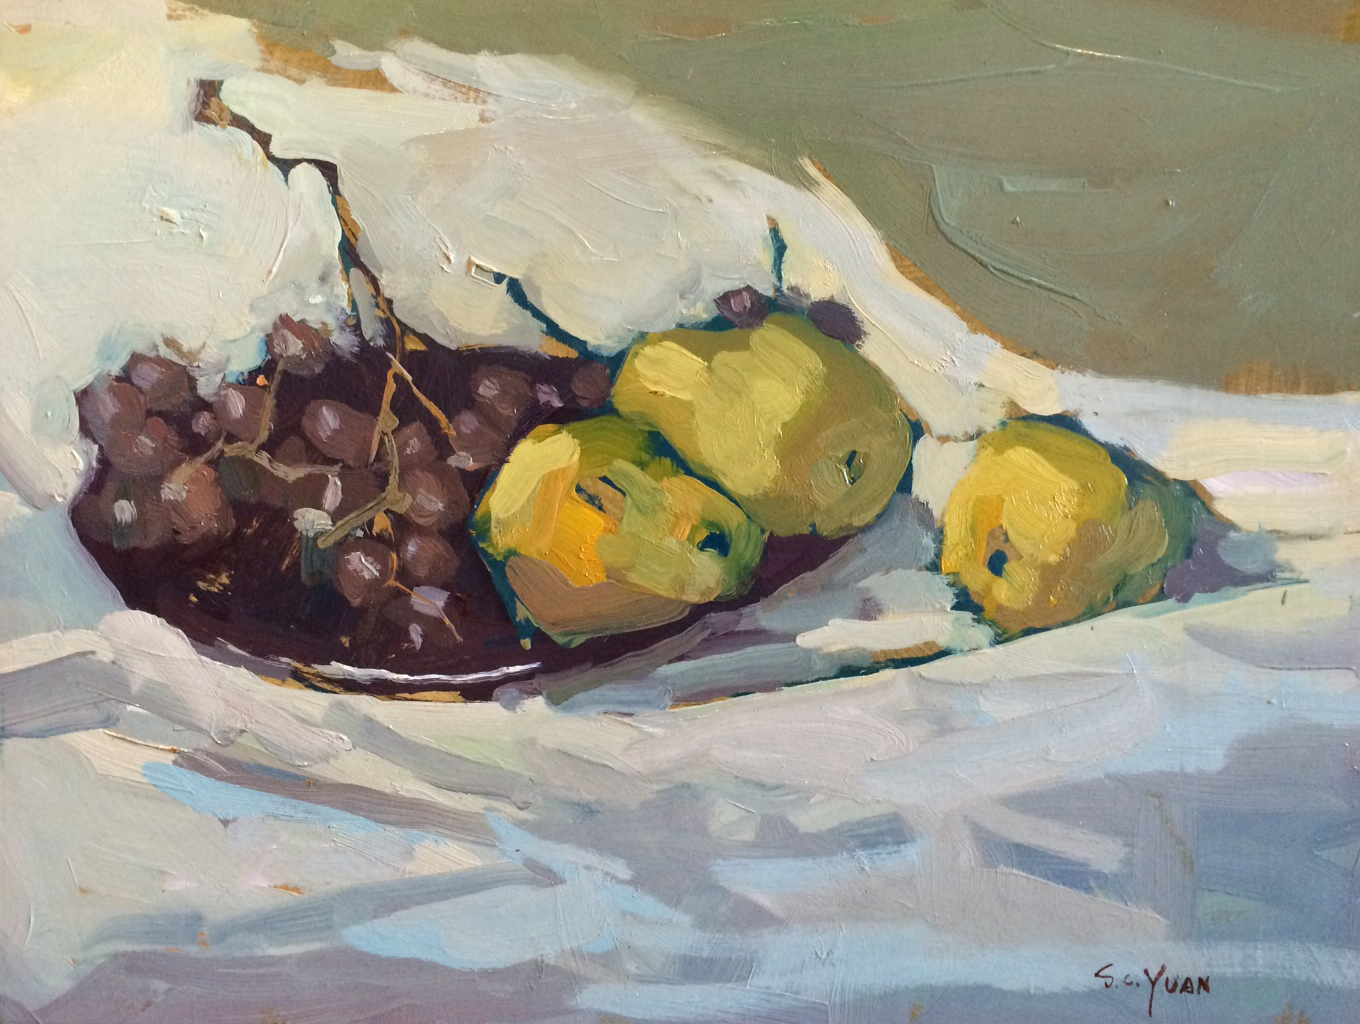 S.C. YUAN - Pears and Grapes - Oil on Board - 14" x 18"